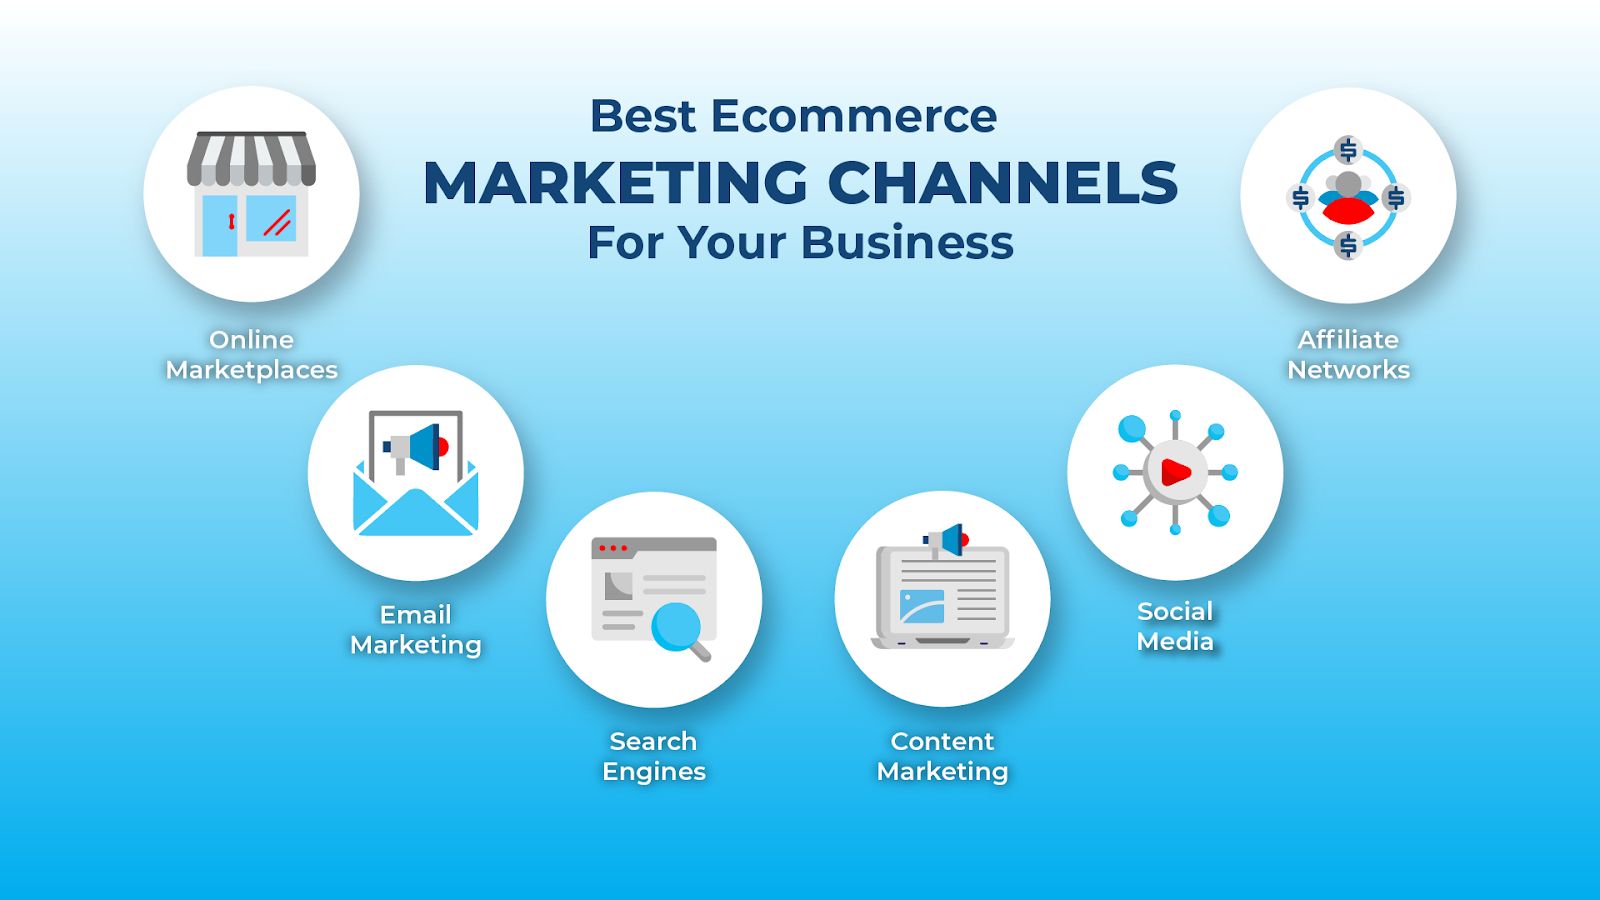 6 Best Marketing Channels for Ecommerce Sites | Nexcess